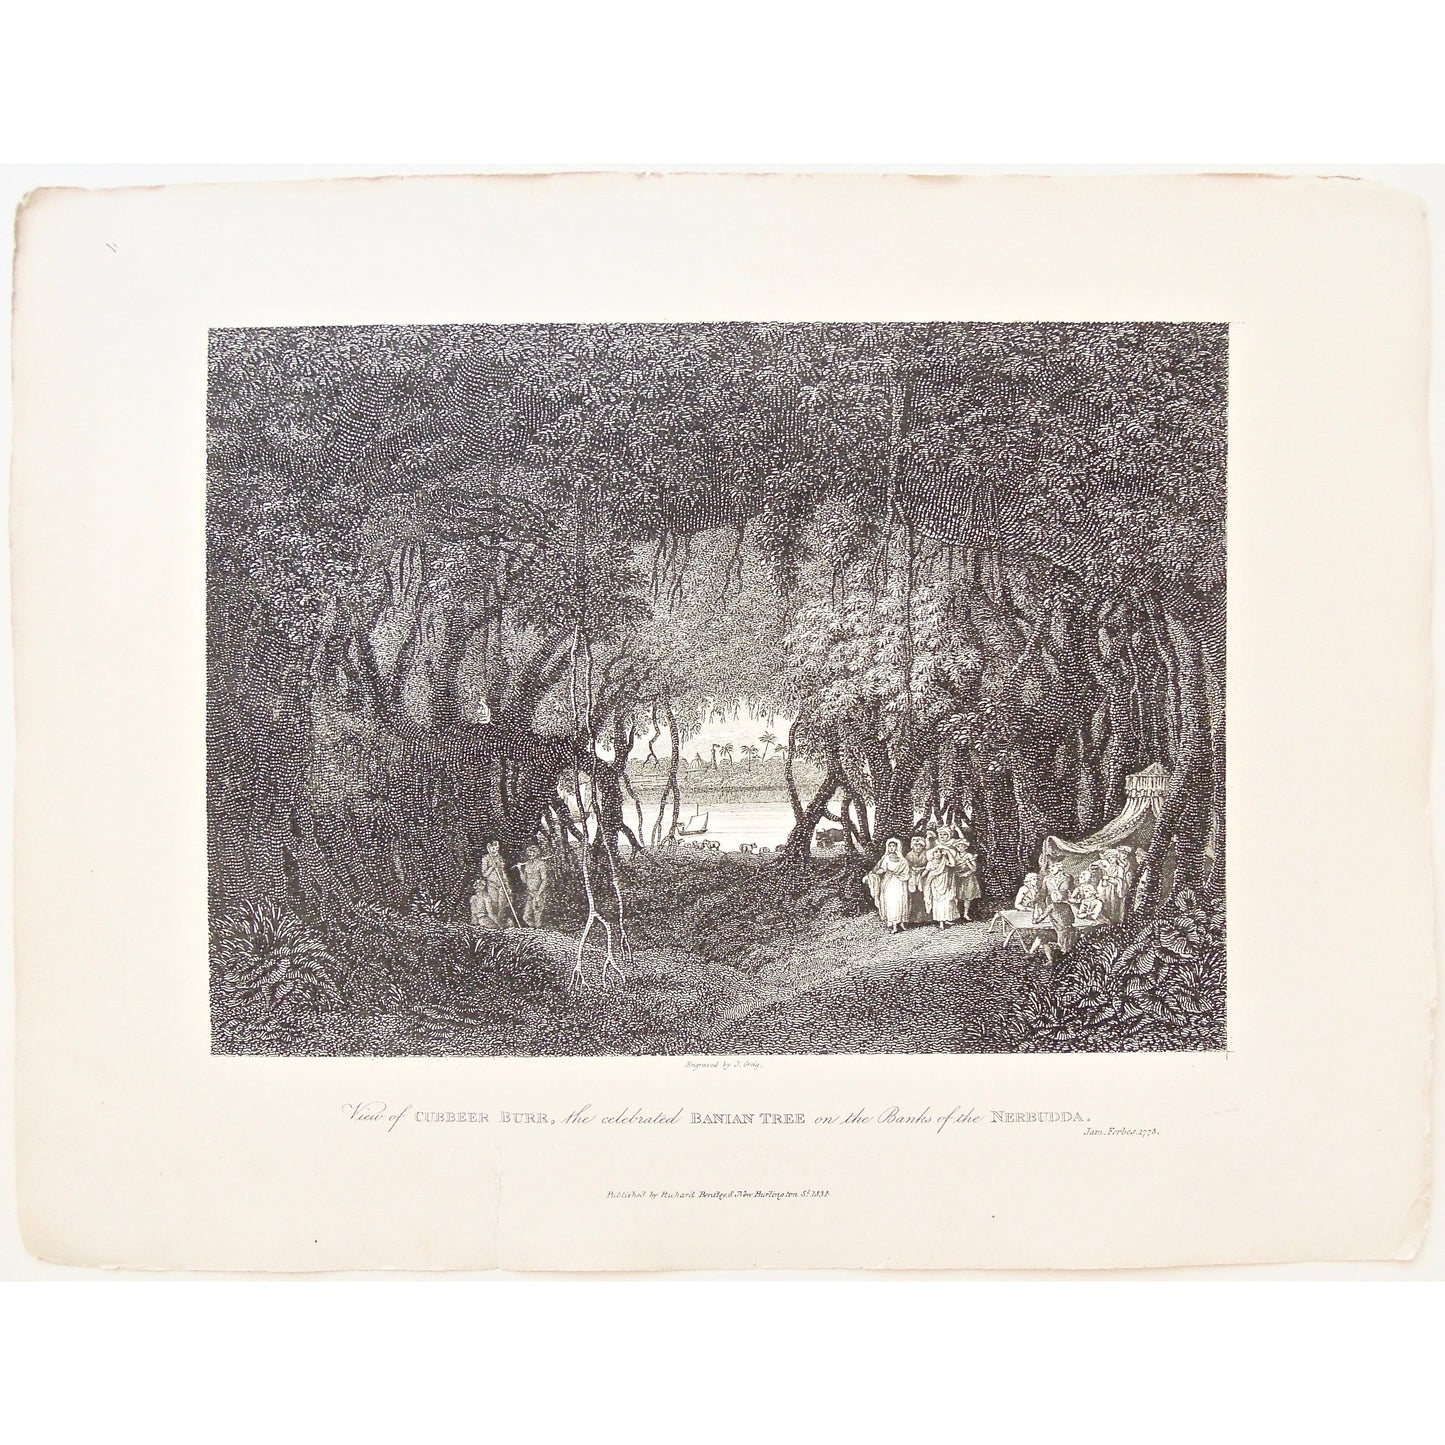 View, Cubbeer burr, Banian Tree, Banyan Tree, Trees, Banks of the Nerbudda, Banks, Nerbudda, ladies, tents, gathering, by the water, under the trees, India, Indian, James Forbes, Forbes, Eliza Rosée, Countess De Montalembert, Oriental Memoirs, Narrative of Seventeen Years Residence in India, Bentley, 8 New Burlington Street, London, Shury, Nichols & Son, 25 Parliament Street, 1778, 1834, Steel engraving, Antique Print, Antique, Prints, Vintage Prints, Vintage, Collector, Collectable, Original, Unique, Rare